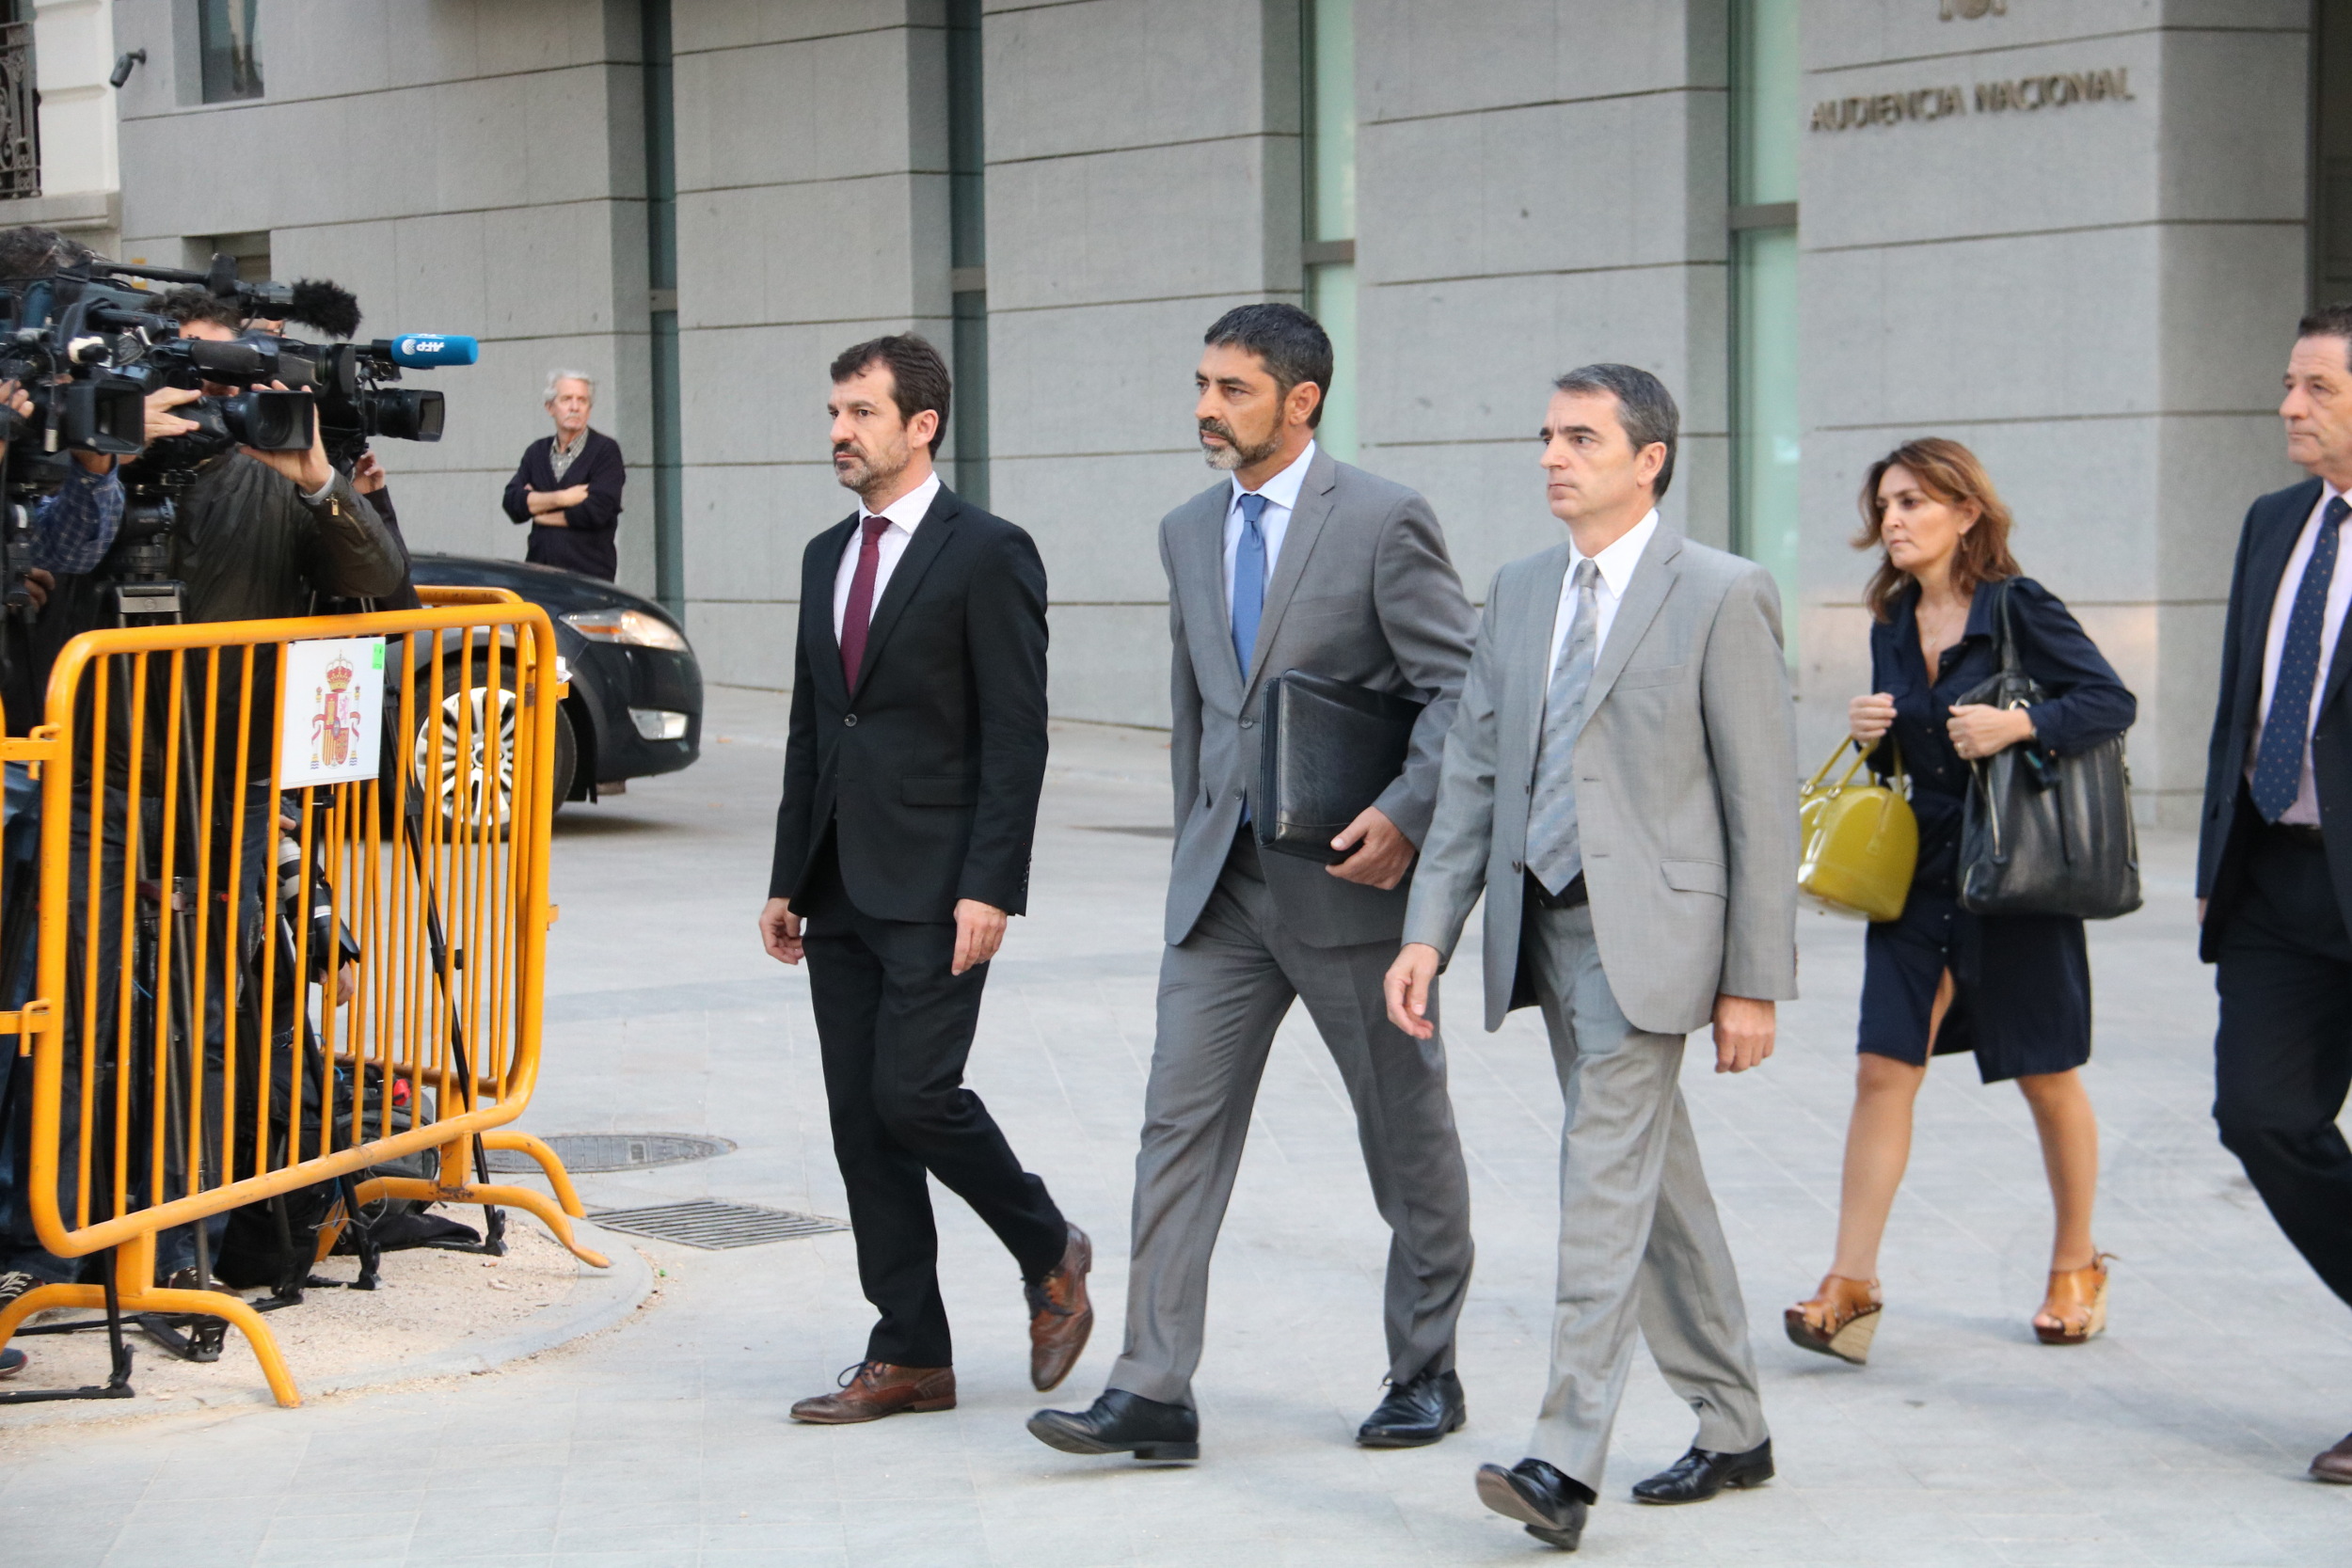 Catalan police chief, Josep Lluís Trapero (center), arriving in the National Court on Monday (by Roger Pi de Cabanyes)